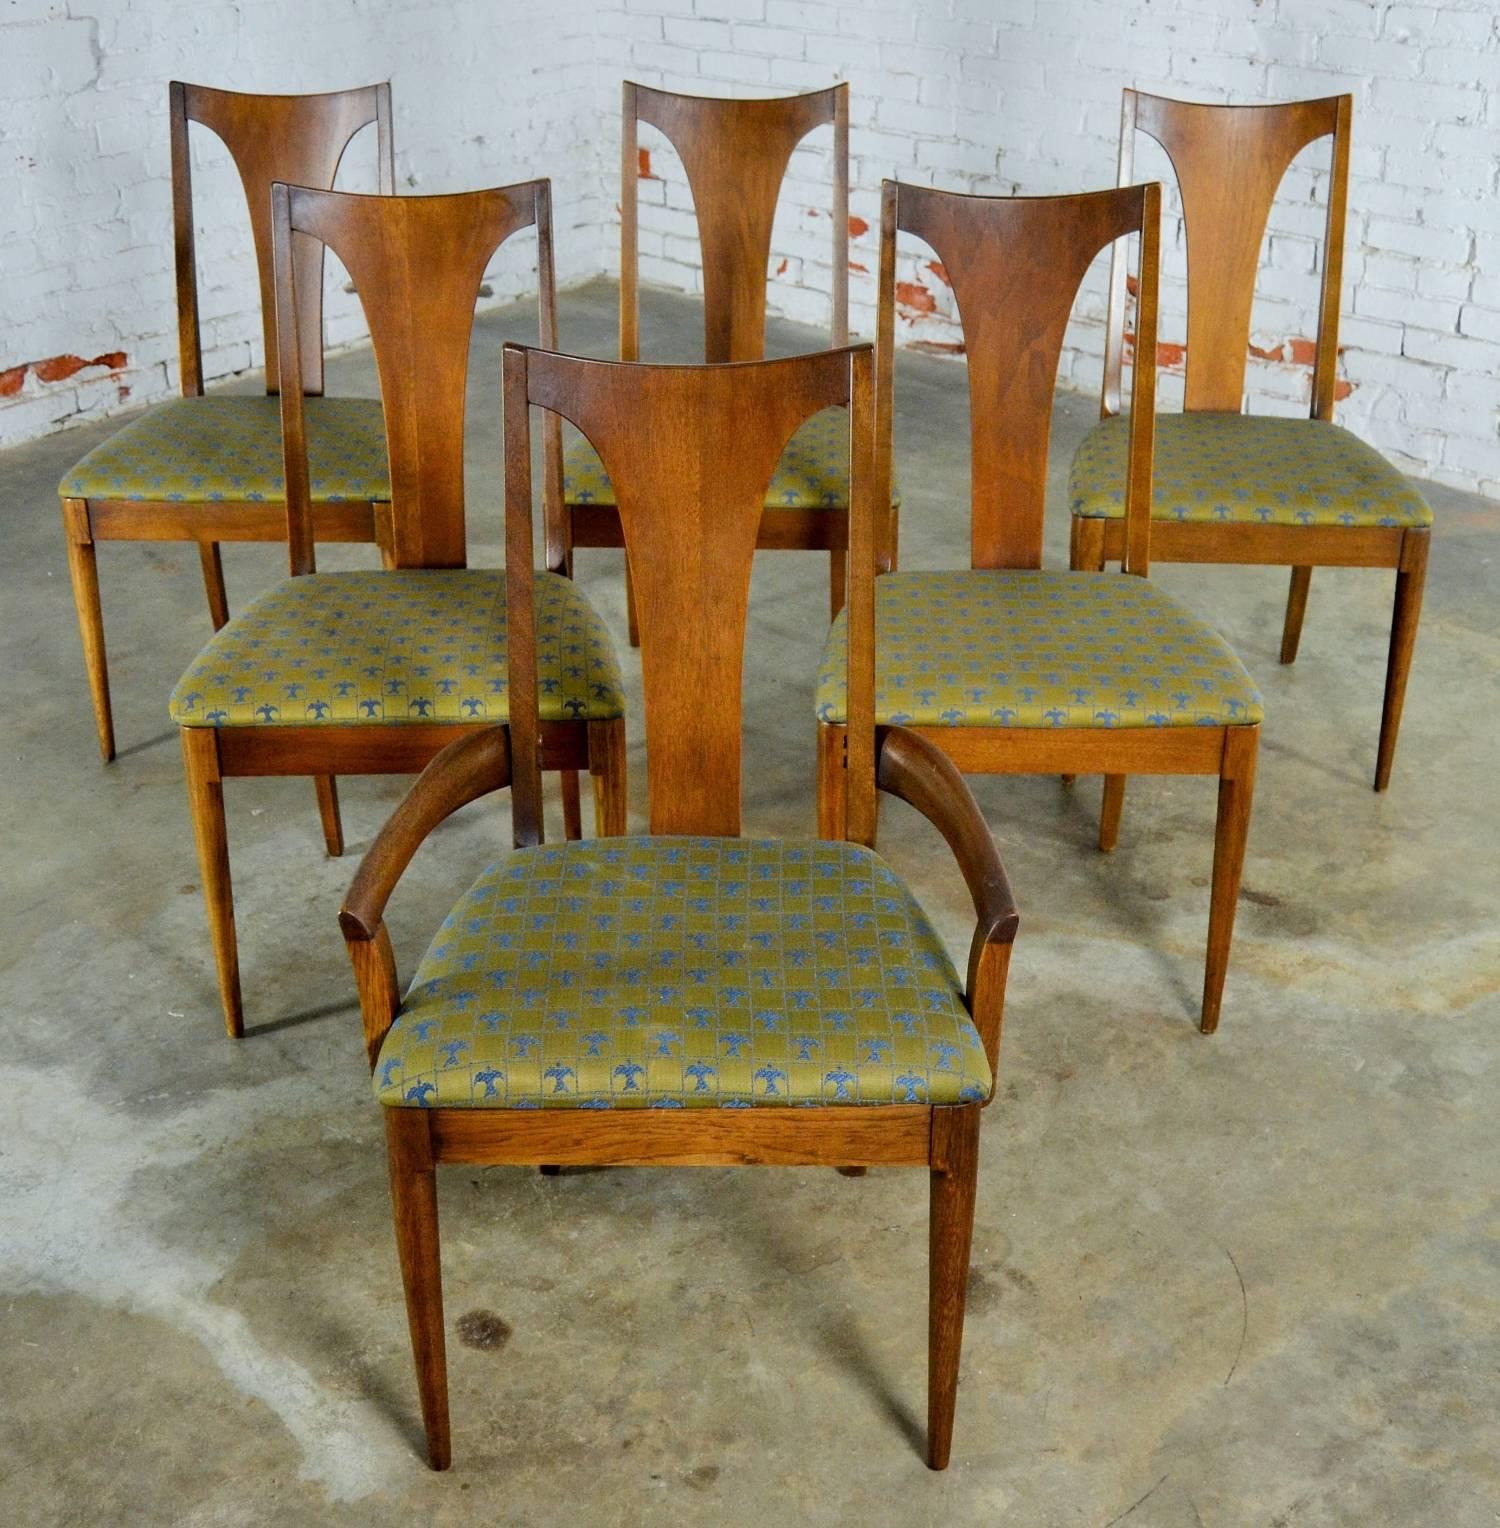 Wonderful set of six walnut Broyhill Brasilia single splat dining chairs, one 6140-84 armchair and five 6140-85 side chairs. Their original condition is fabulous including their incredible original blue and green Lenoir Chair Company upholstery!